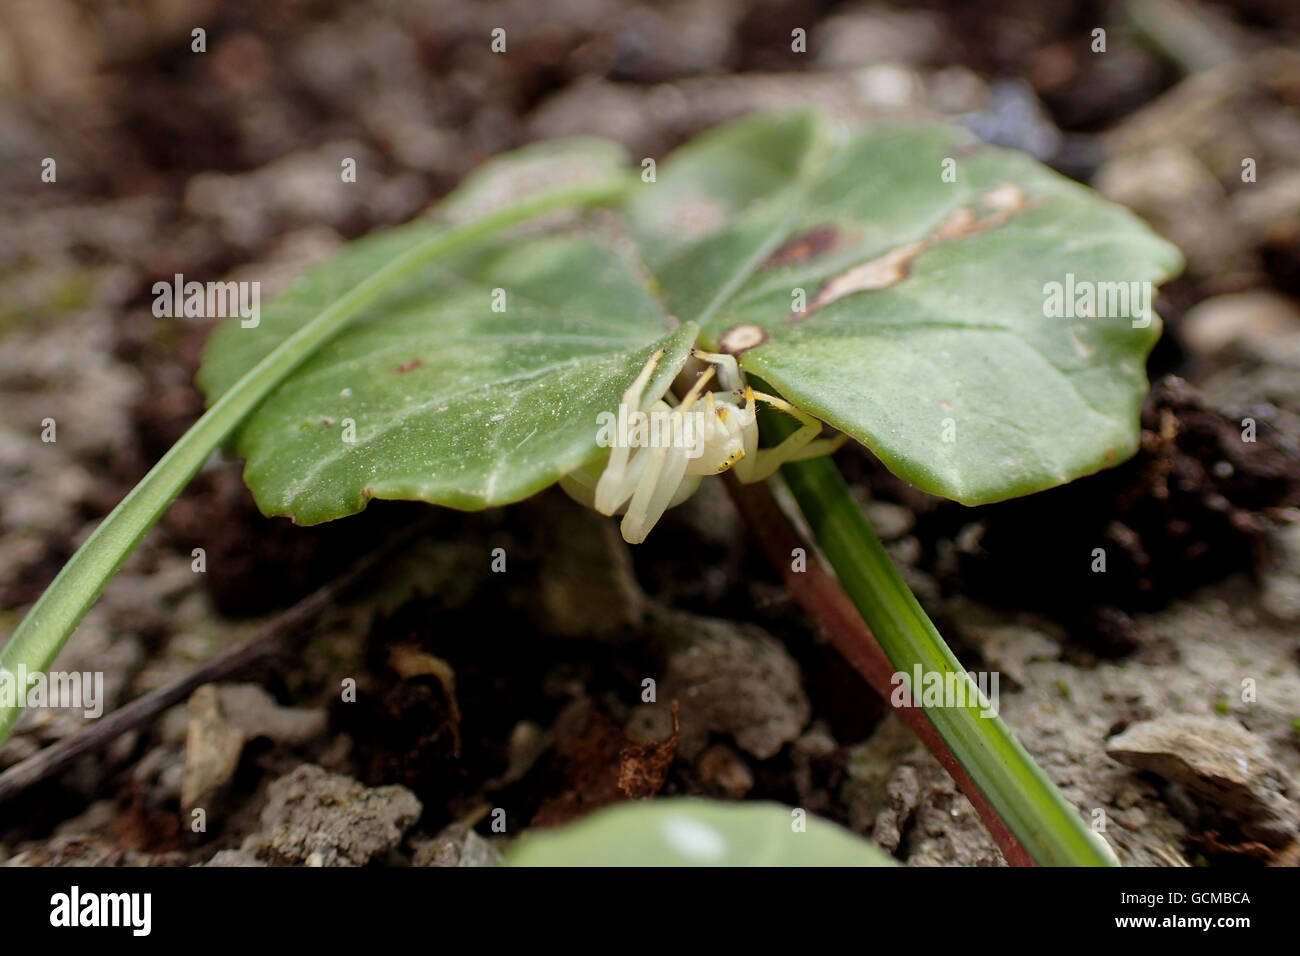 White pale crab spider (Misumena vatia) looking out from underneath the leaf of an ivy-leaved cyclamen (Cyclamen hederifolium) Stock Photo